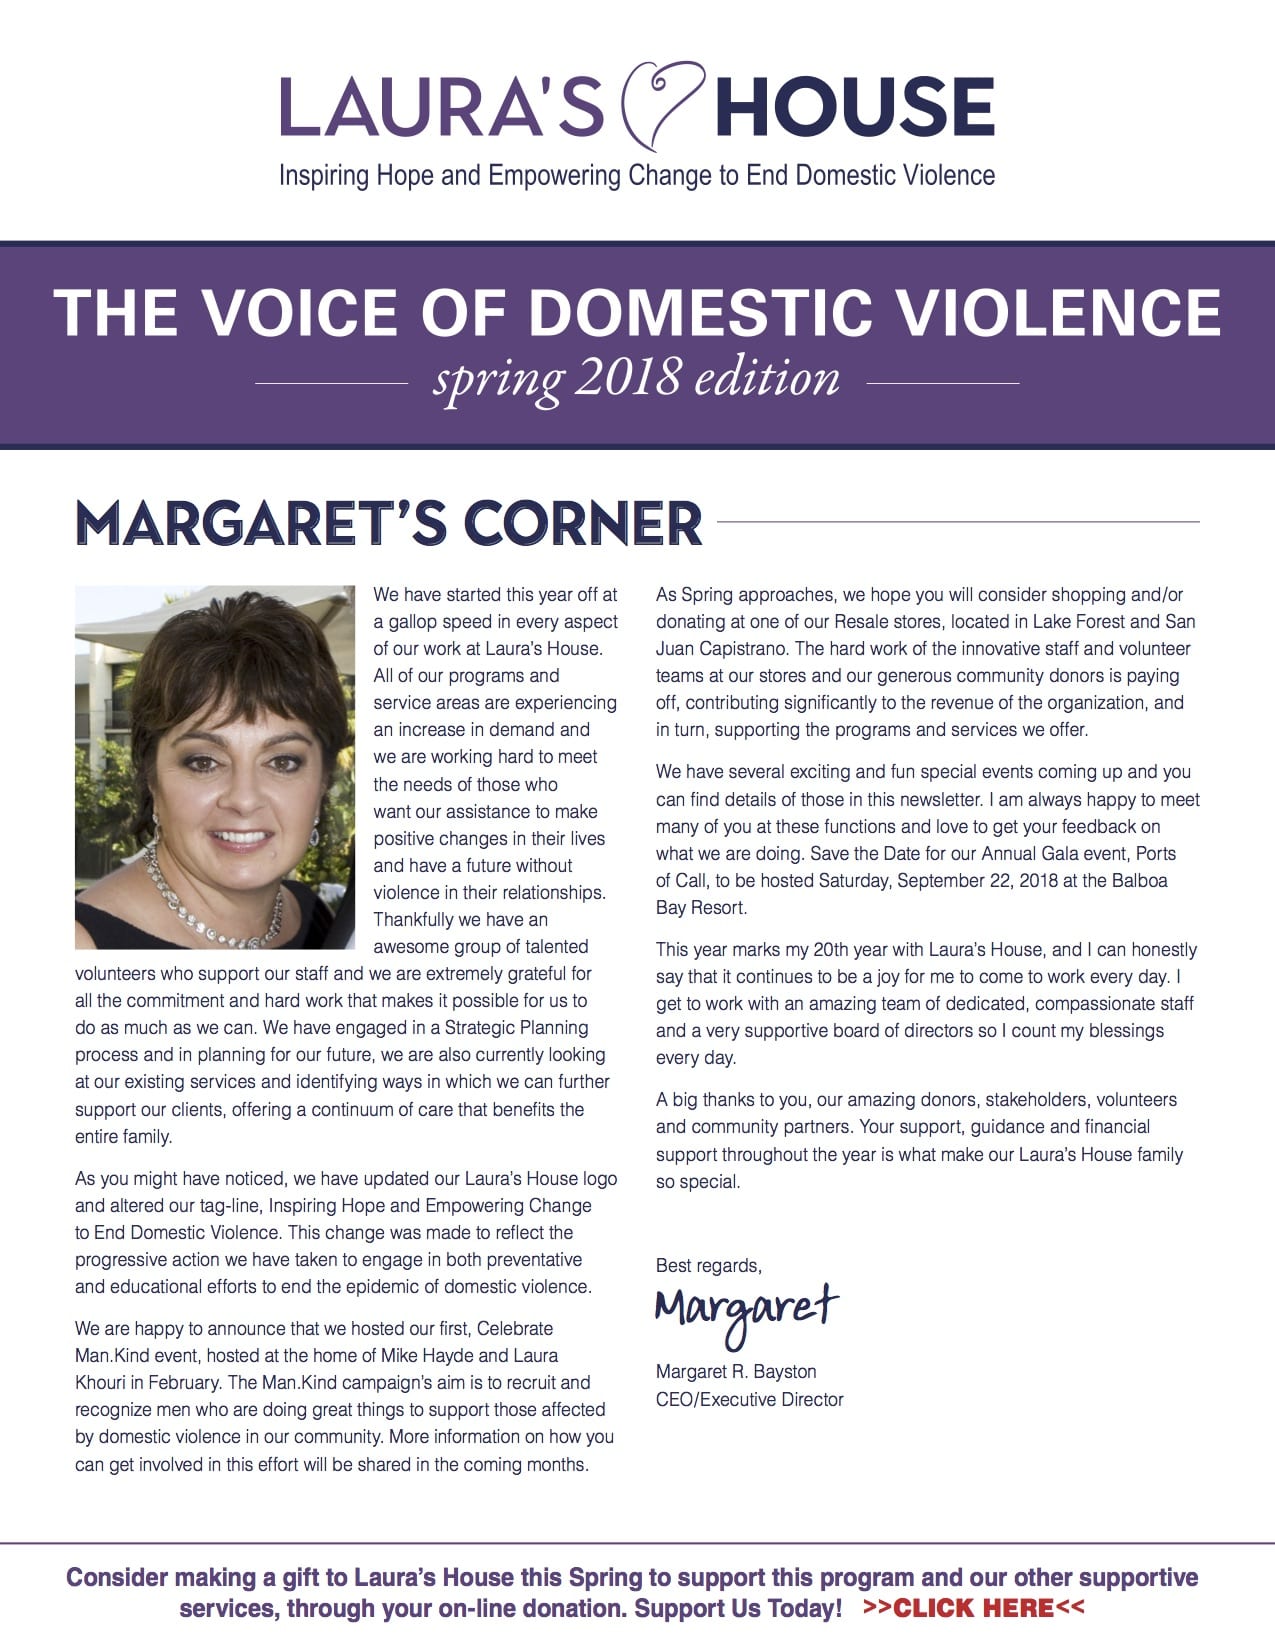 The Voice of Domestic Violence - Spring 2018 edition